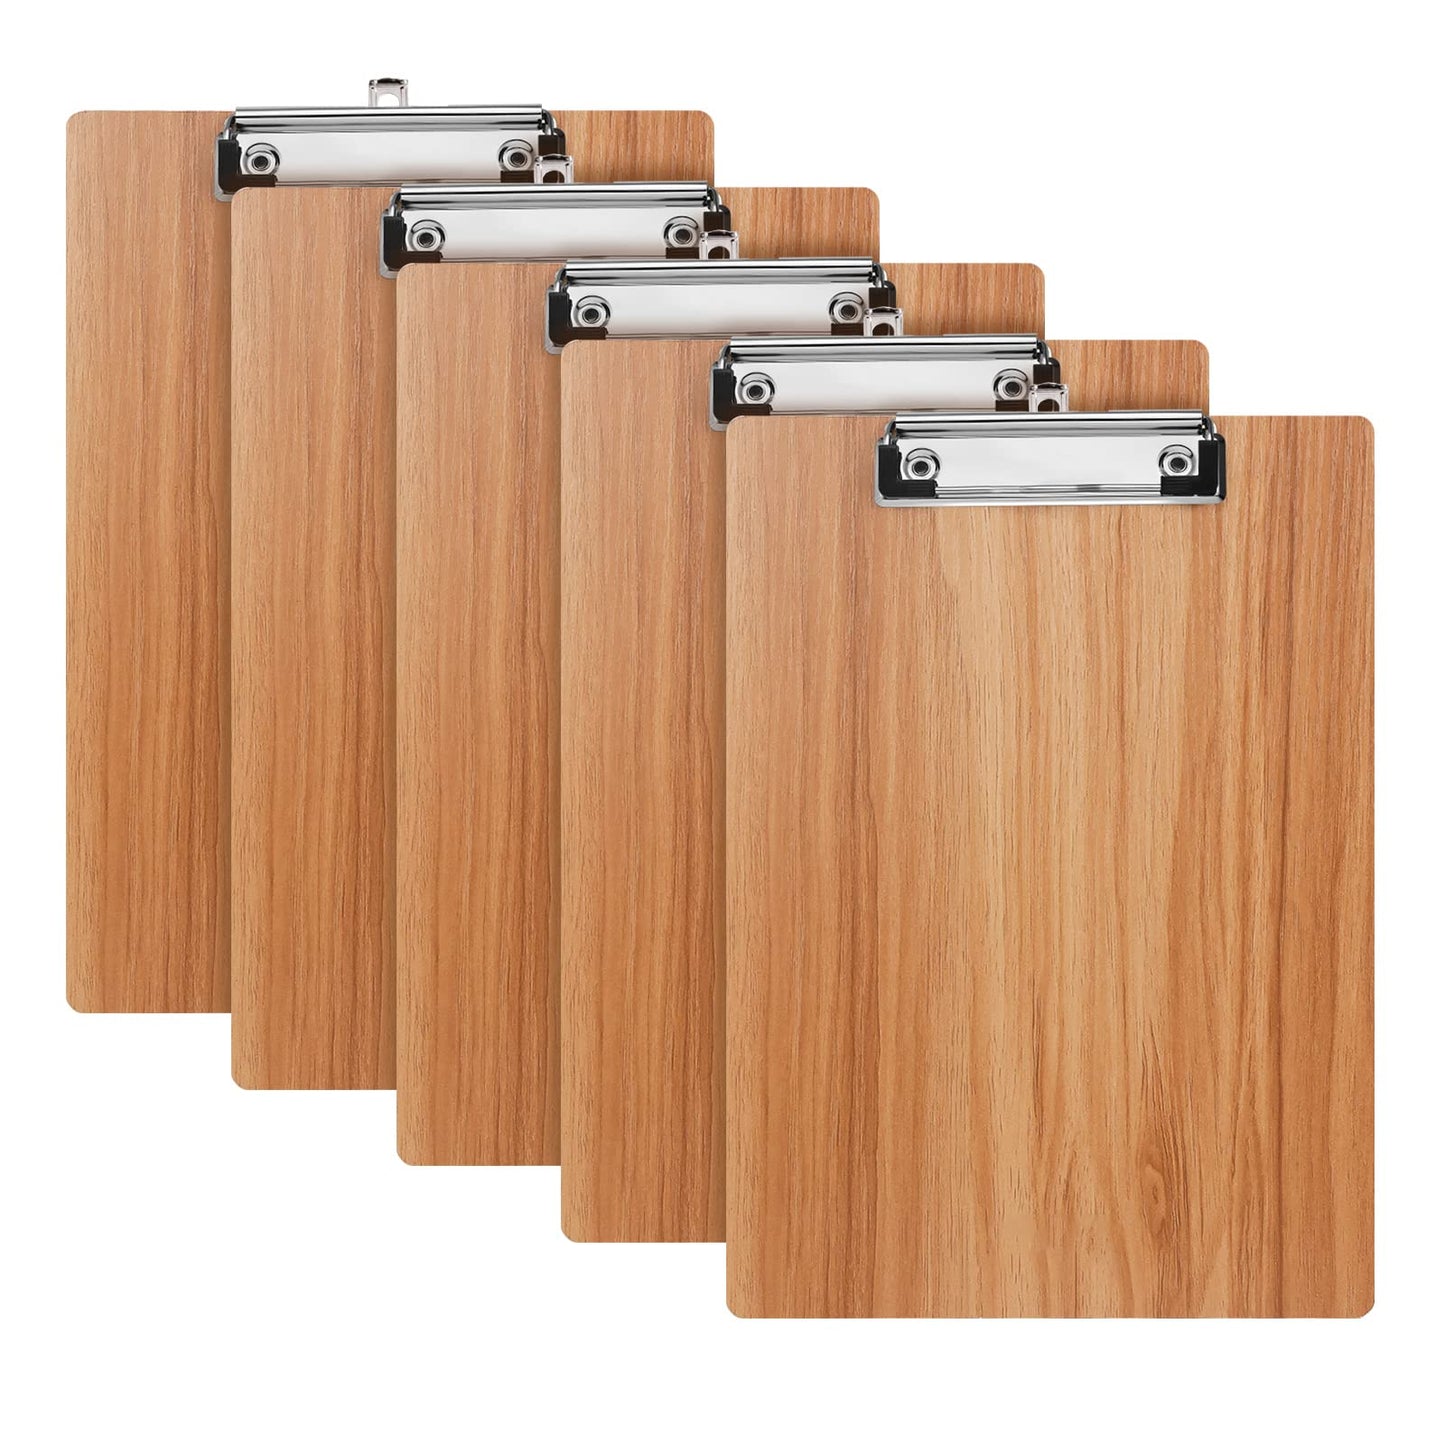 A4 Clipboard,5 Pack Clipboard Holders with Low Profile Clip and Hanging Hole,A4 Wooden Clipboard Hardboard Clipboard Clip Board